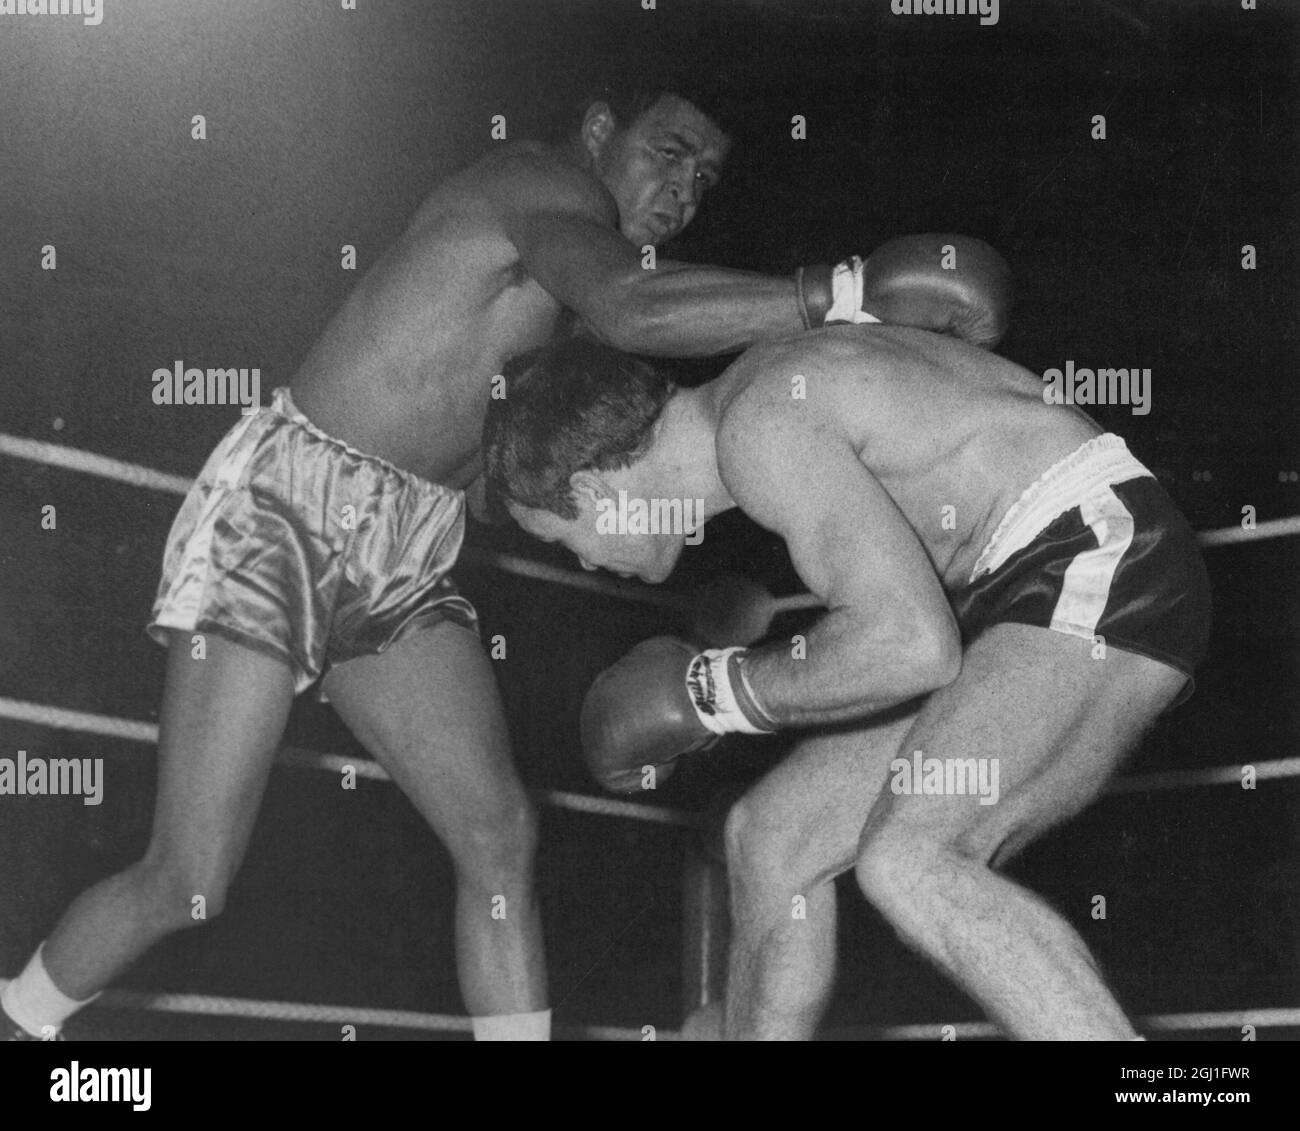 Boxing . Dave Charnley , the British and European lightweight champion beat coloured American J D Ellis when the fight was stopped in the 6th round , at the Royal Albert Hall , London . Charnley ducks away from a right by Ellis . 12th December 1962 Stock Photo